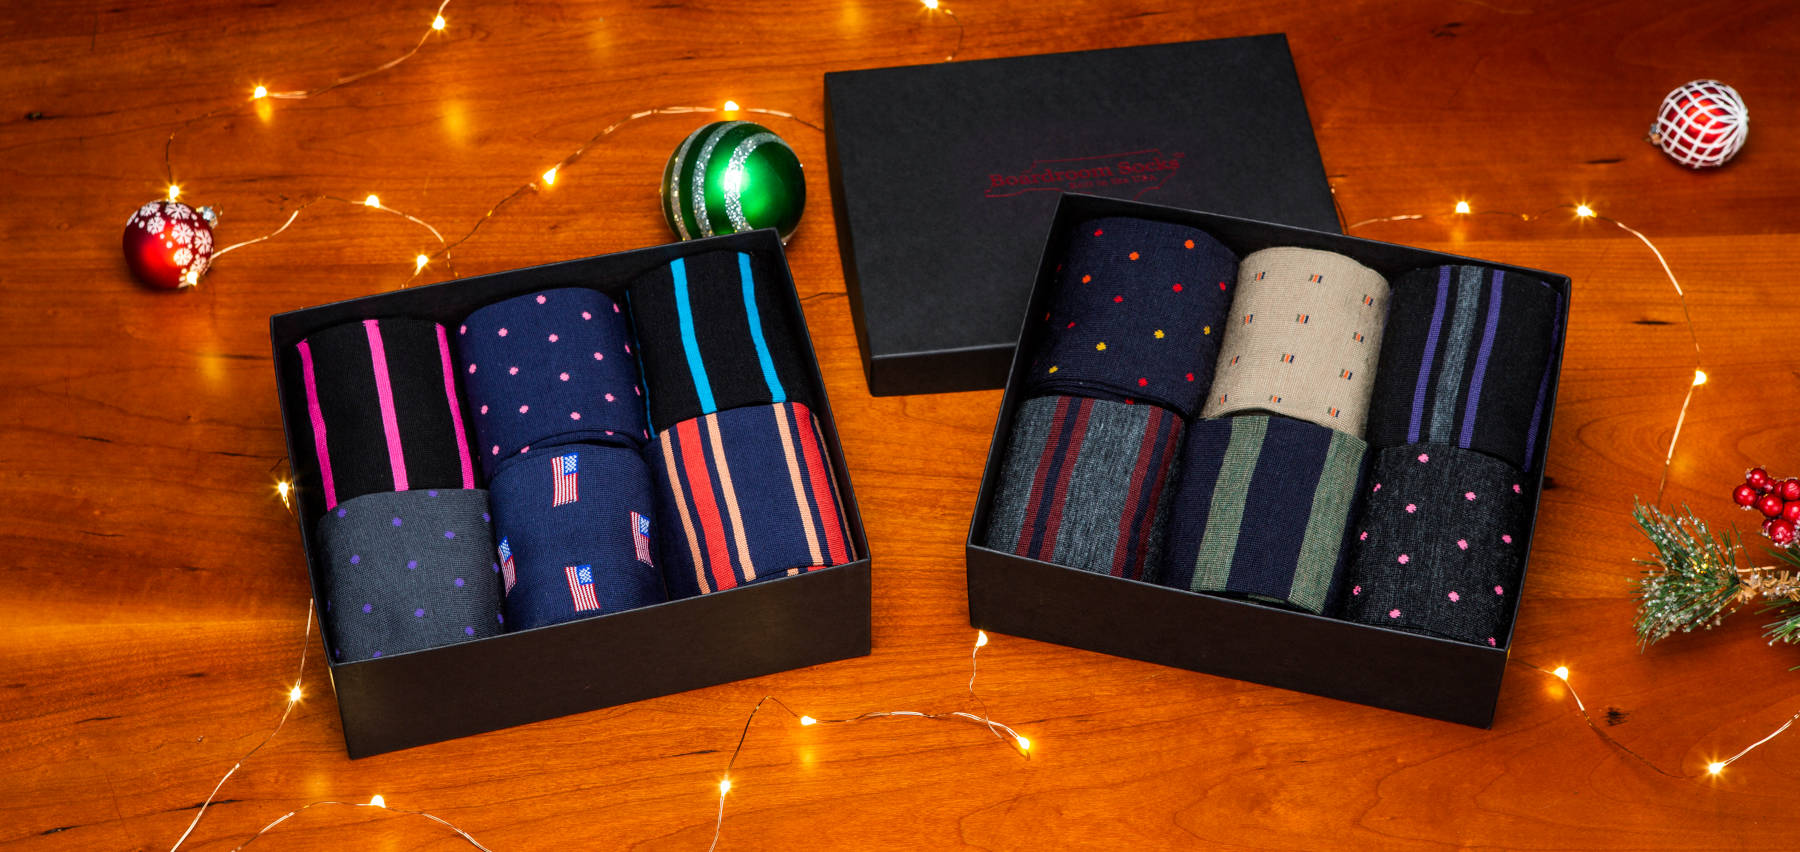 two gift boxes filled with colorful dress socks arranged on a wooden table with holiday decor